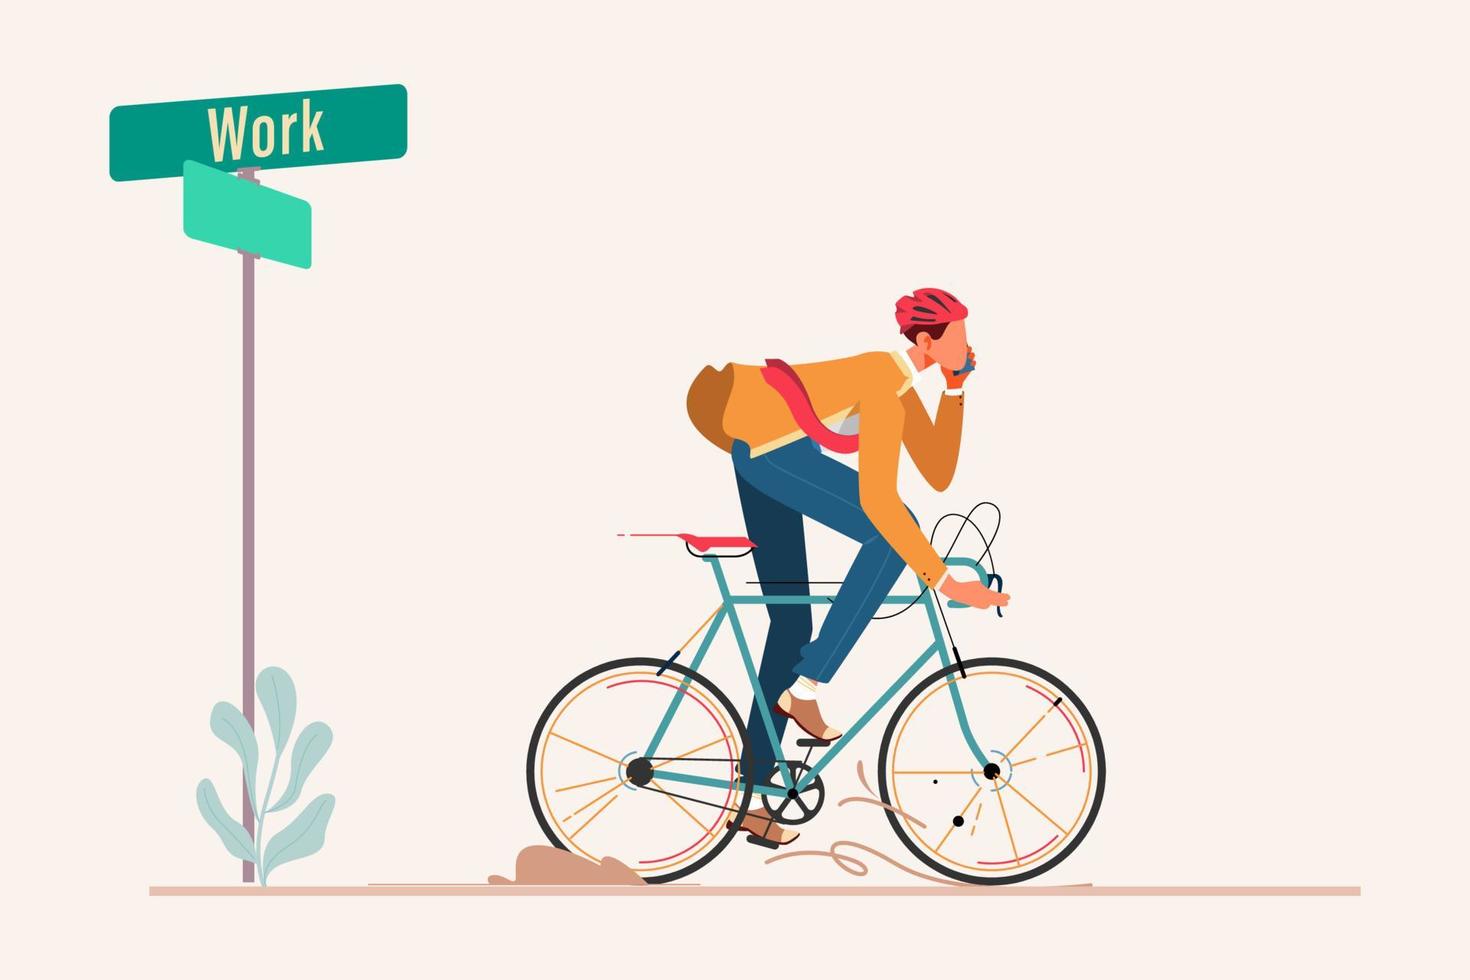 Bussinesman Riding Bycicle to Work Flat Design Concept, A Man Ride Bycicle to Work Vector Illustration